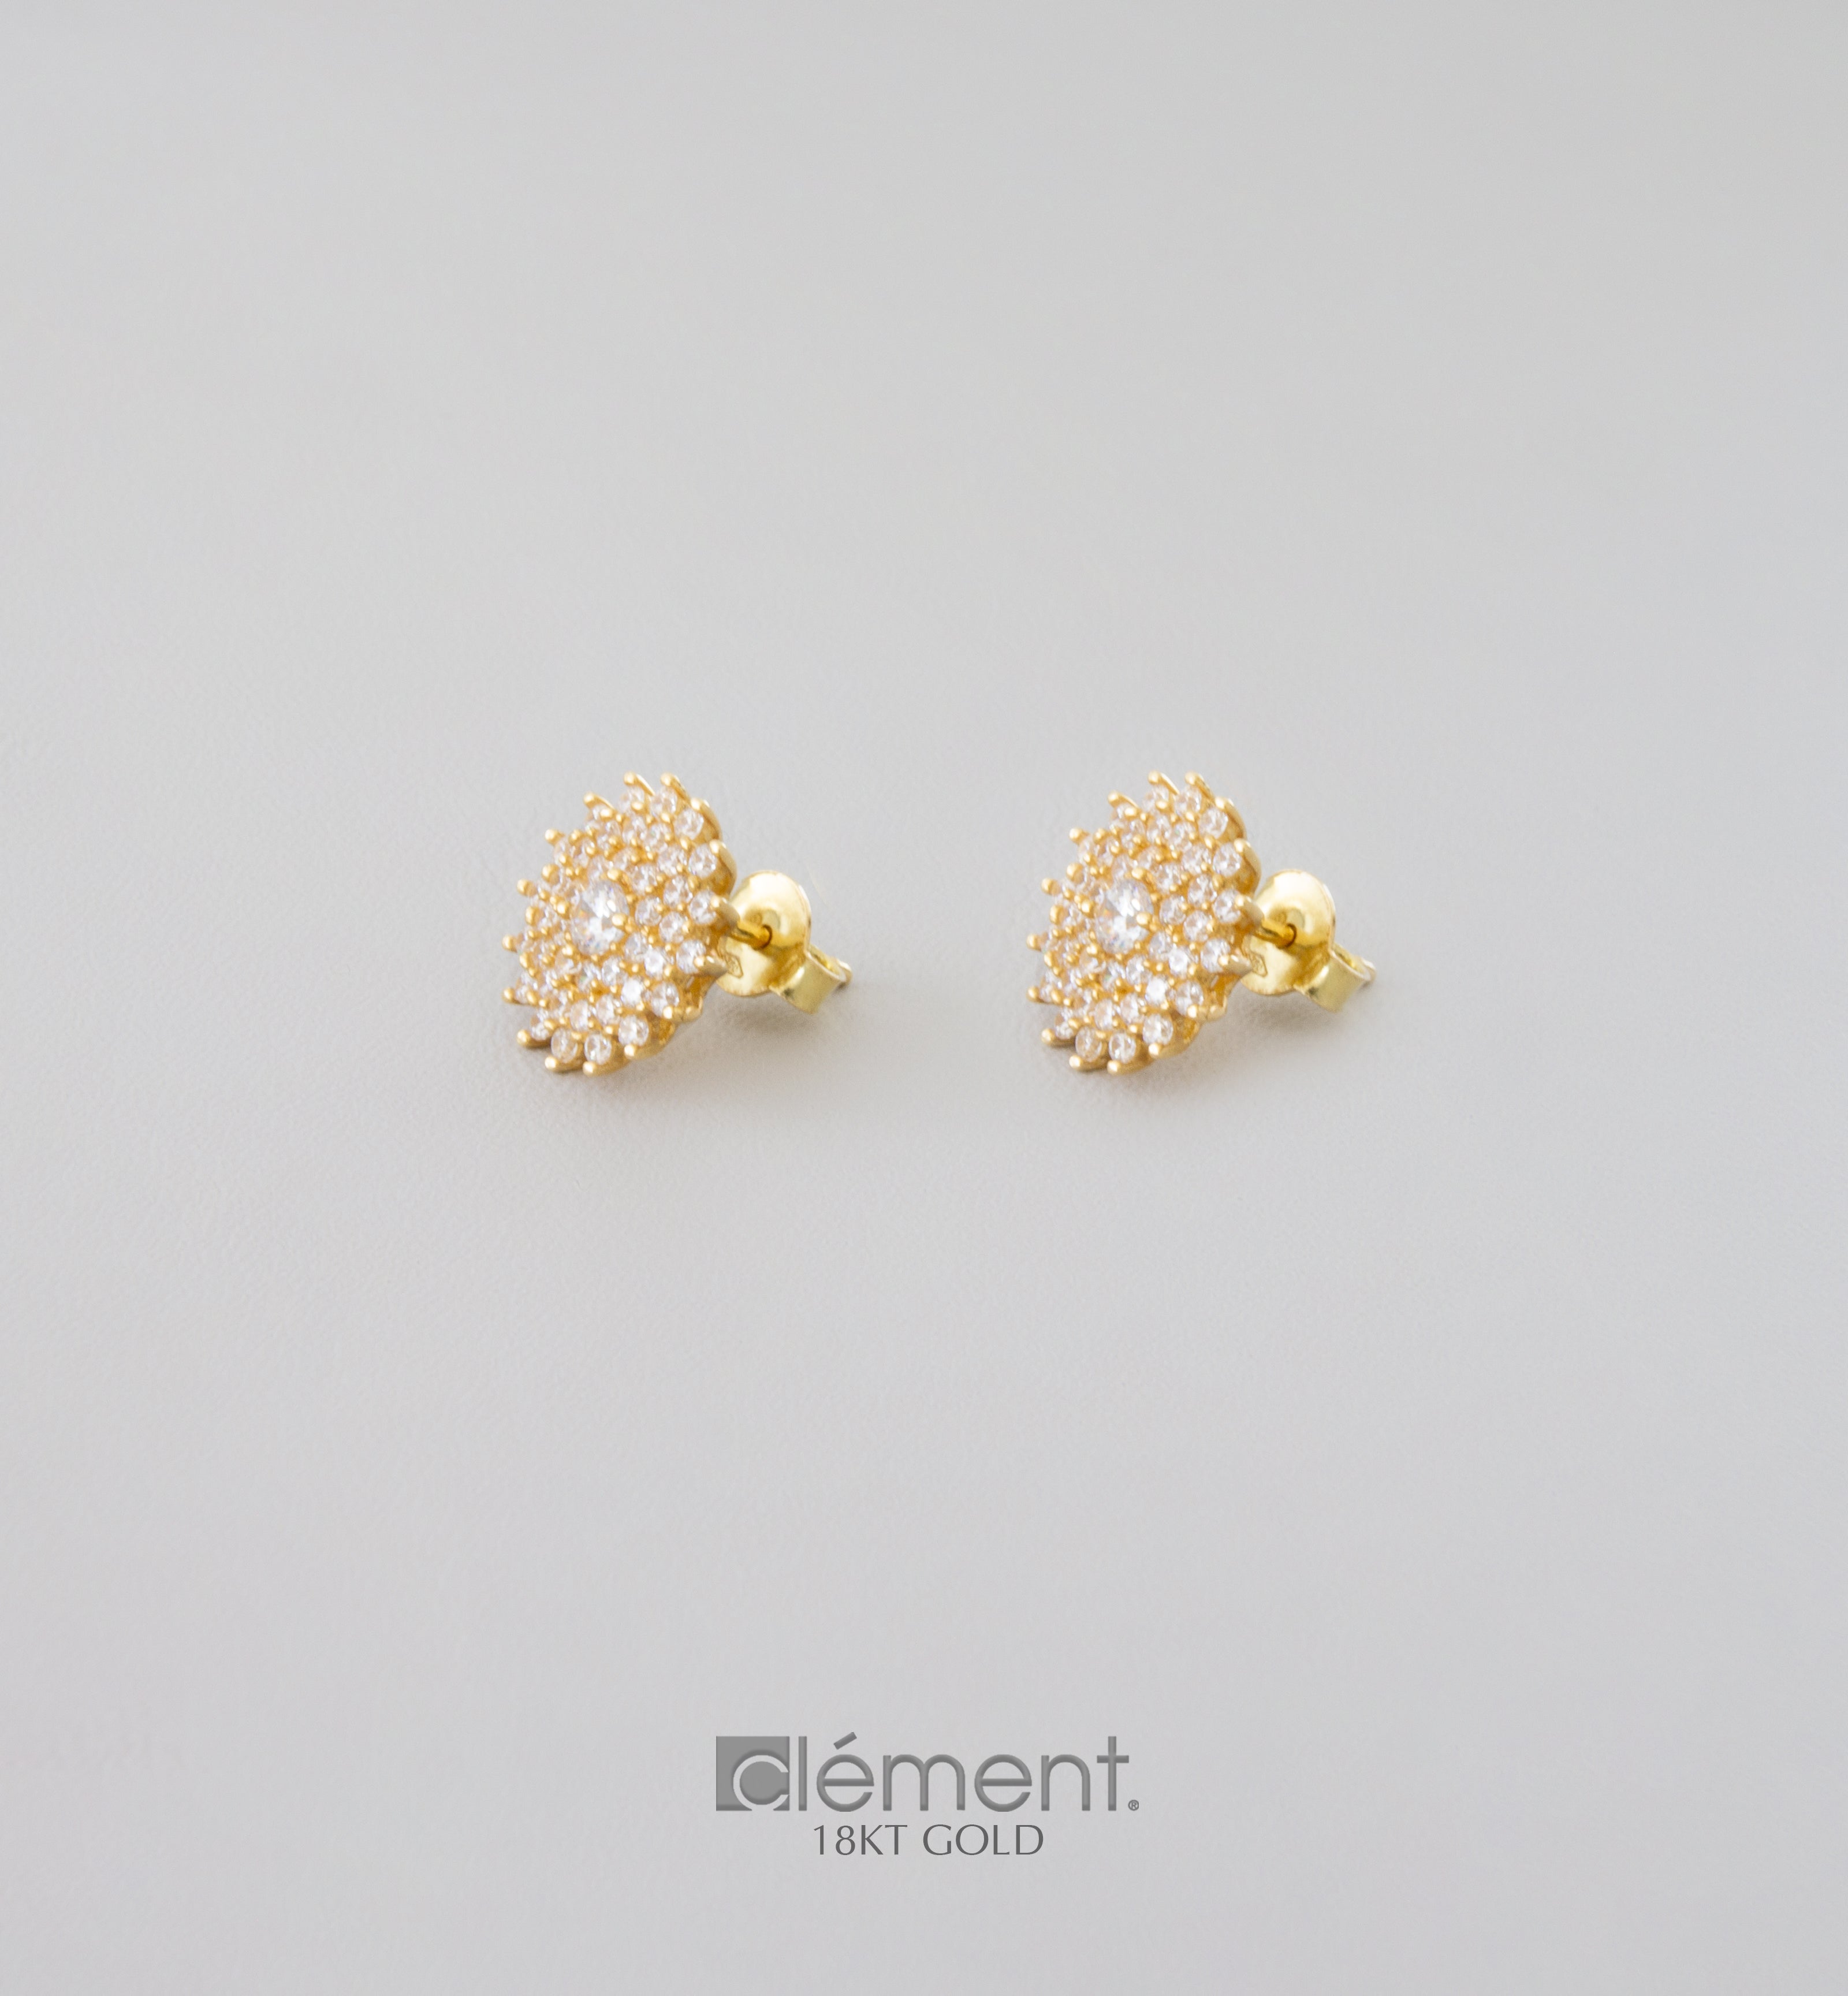 18ct Yellow Gold Earrings with Cubic Zircon Stones